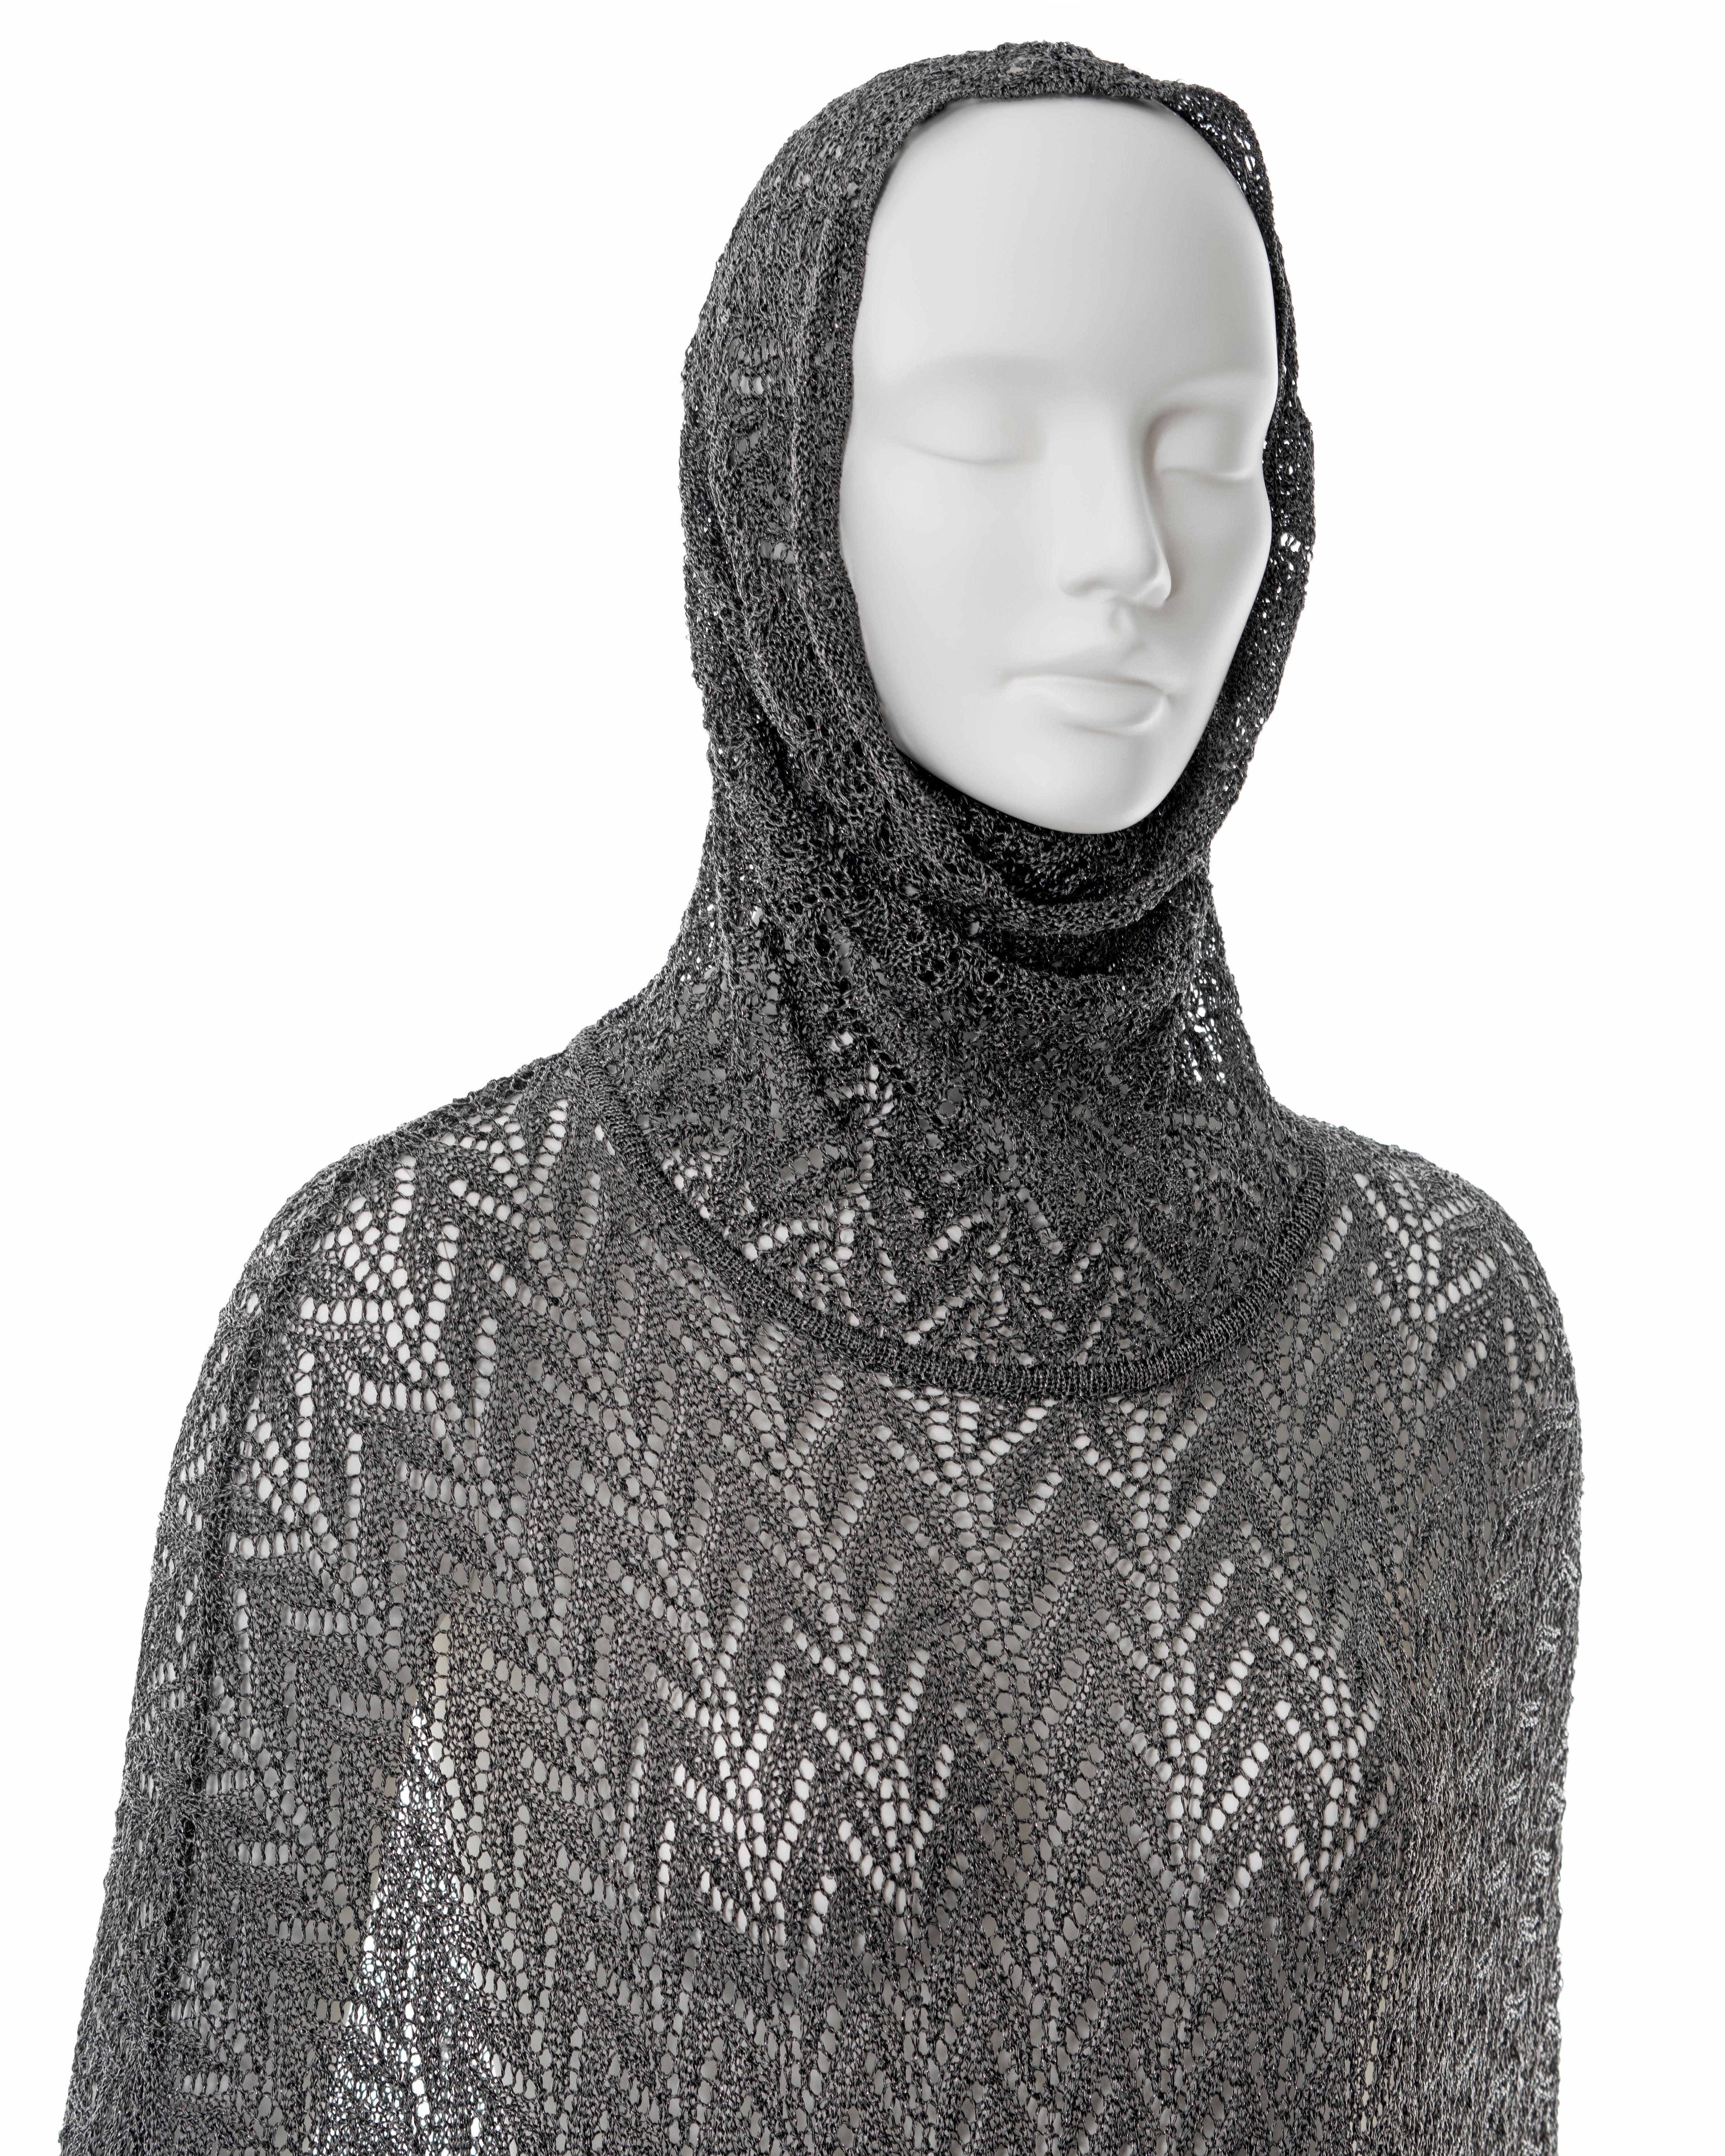 Christian Dior by John Galliano silver crochet sweater dress, fw 1998 For Sale 2